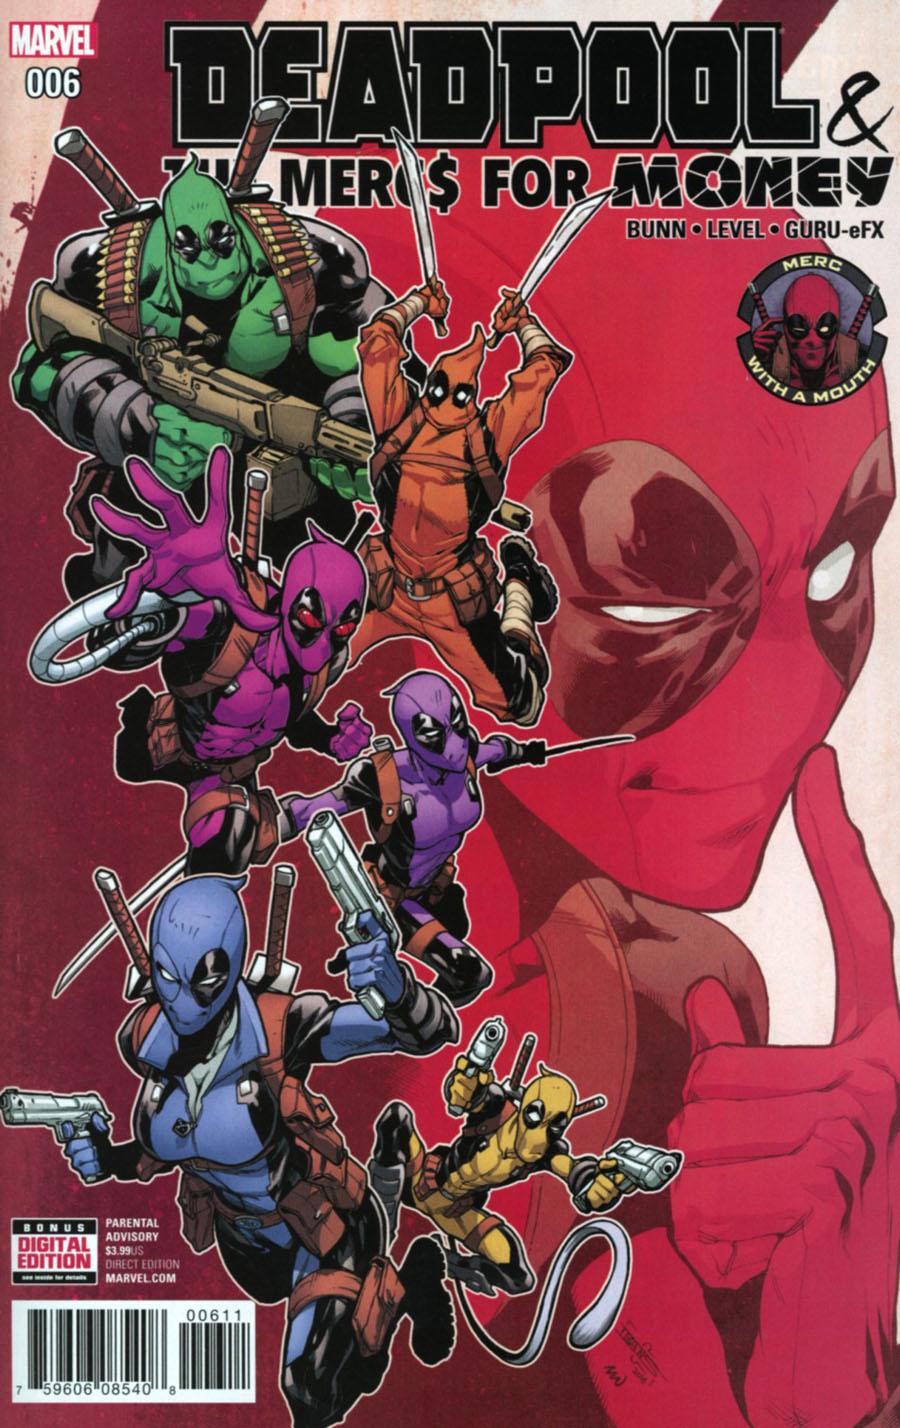 Deadpool And The Mercs For Money Vol. 2 #6